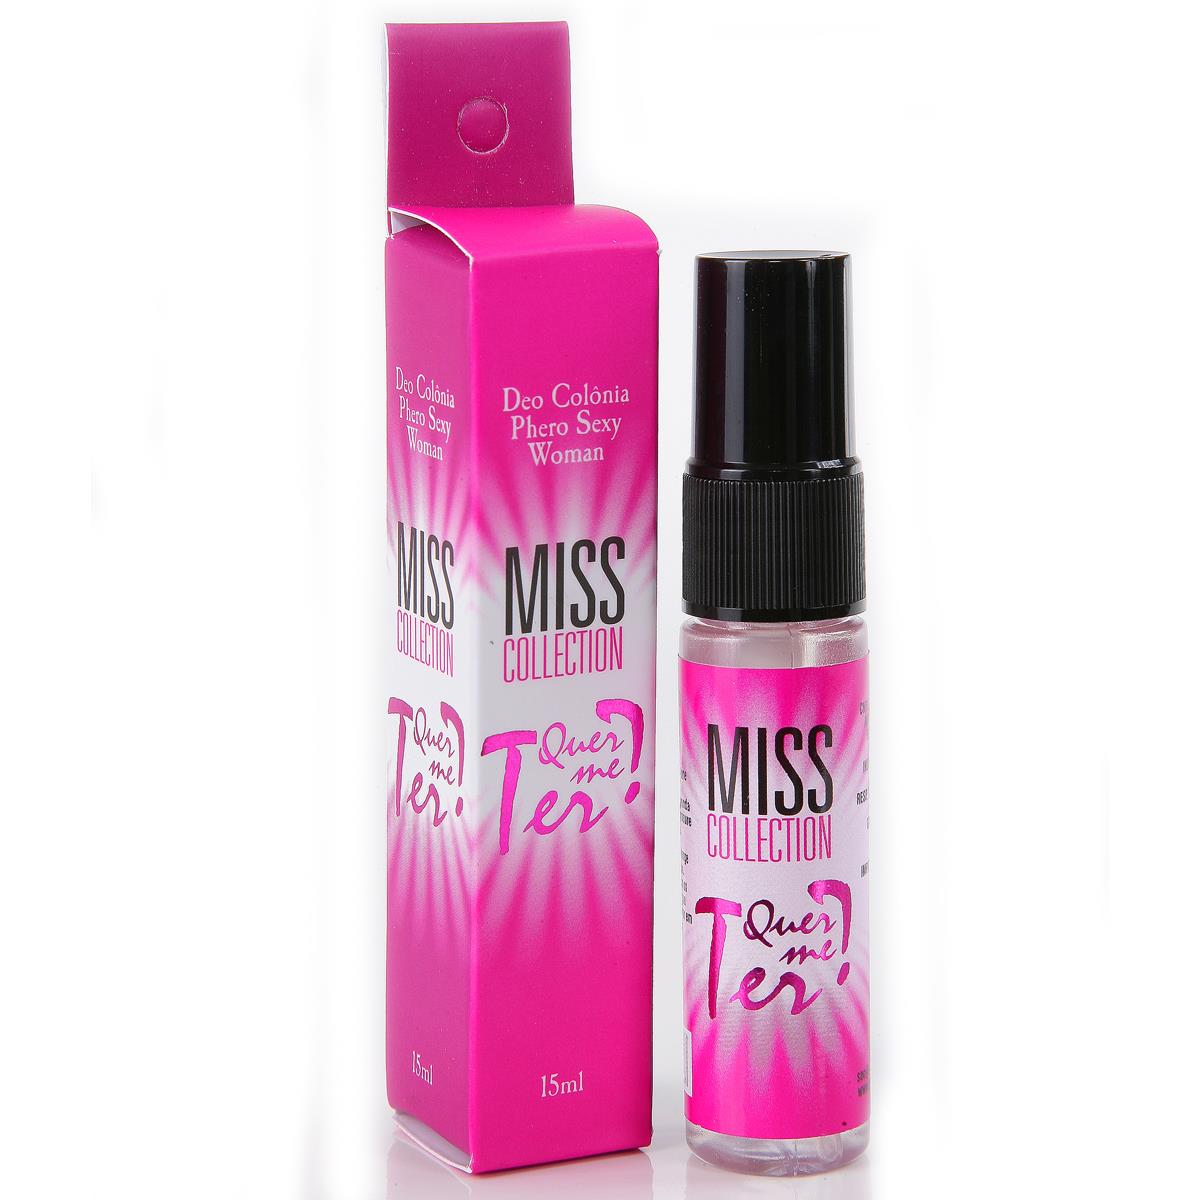 Deo Colônia Phero Sexy Woman Quer me Ter ? 15ml Miss Collection